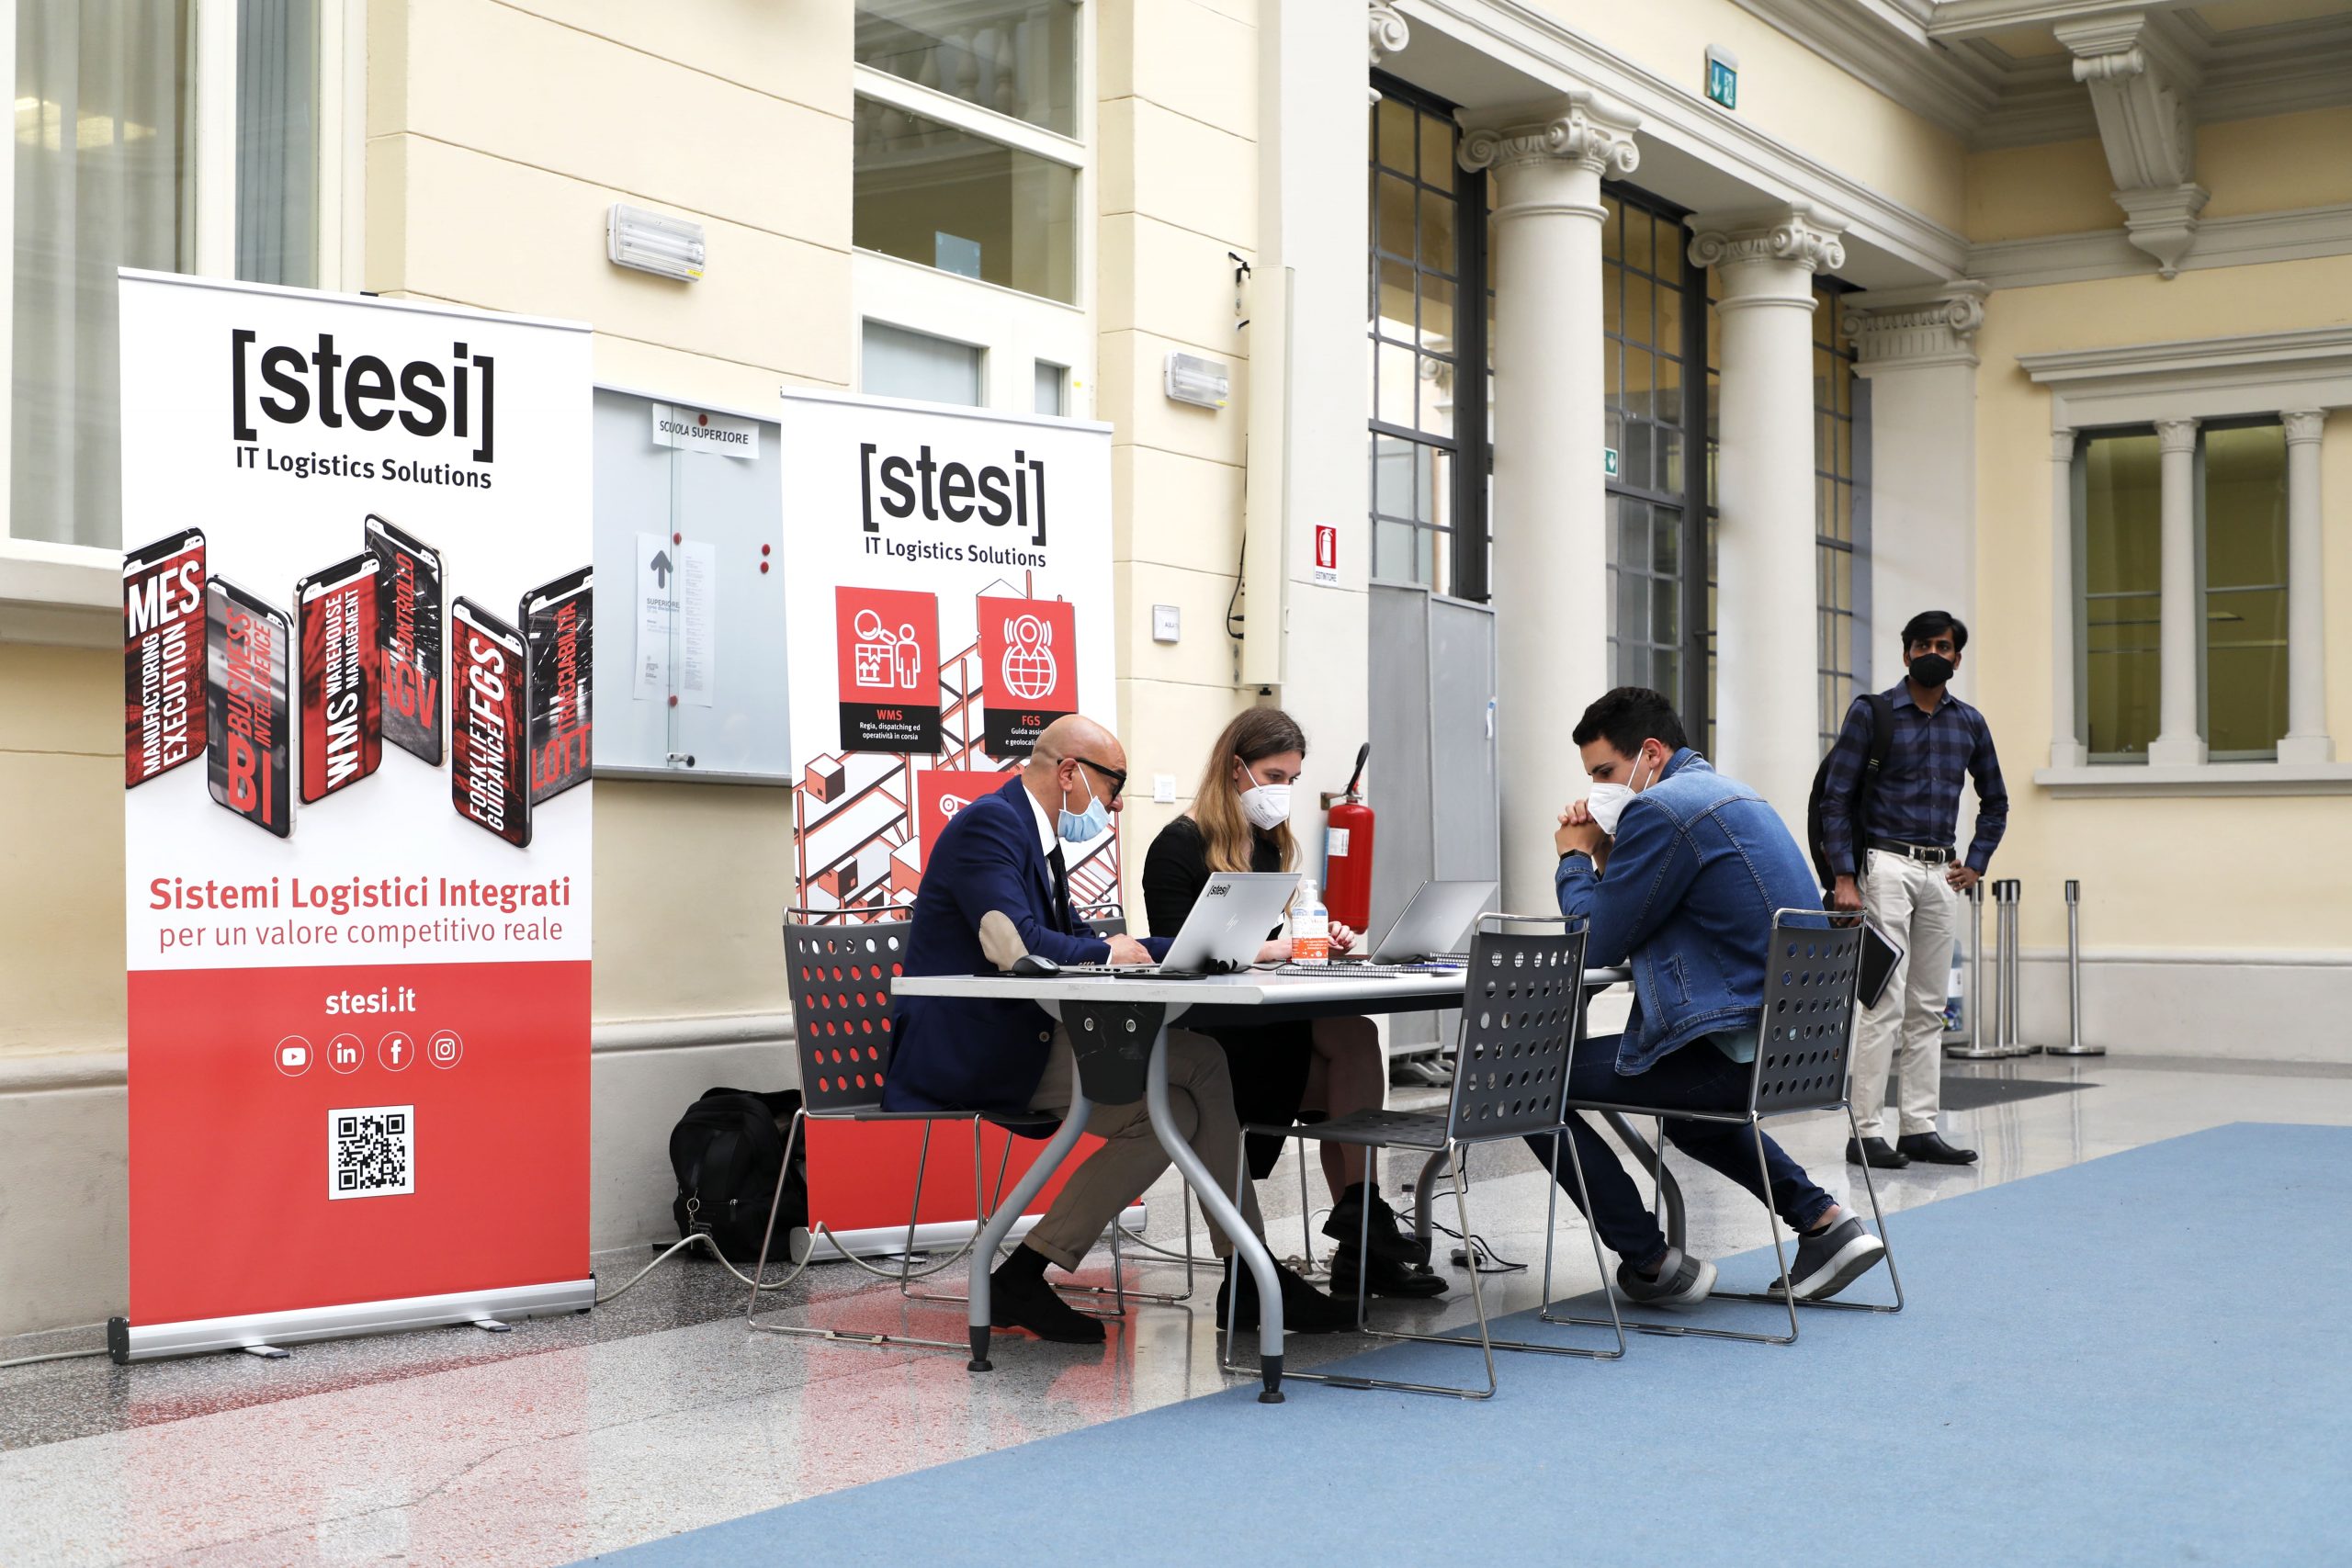 Stesi participates in the Placement Wednesday at the University of Udine